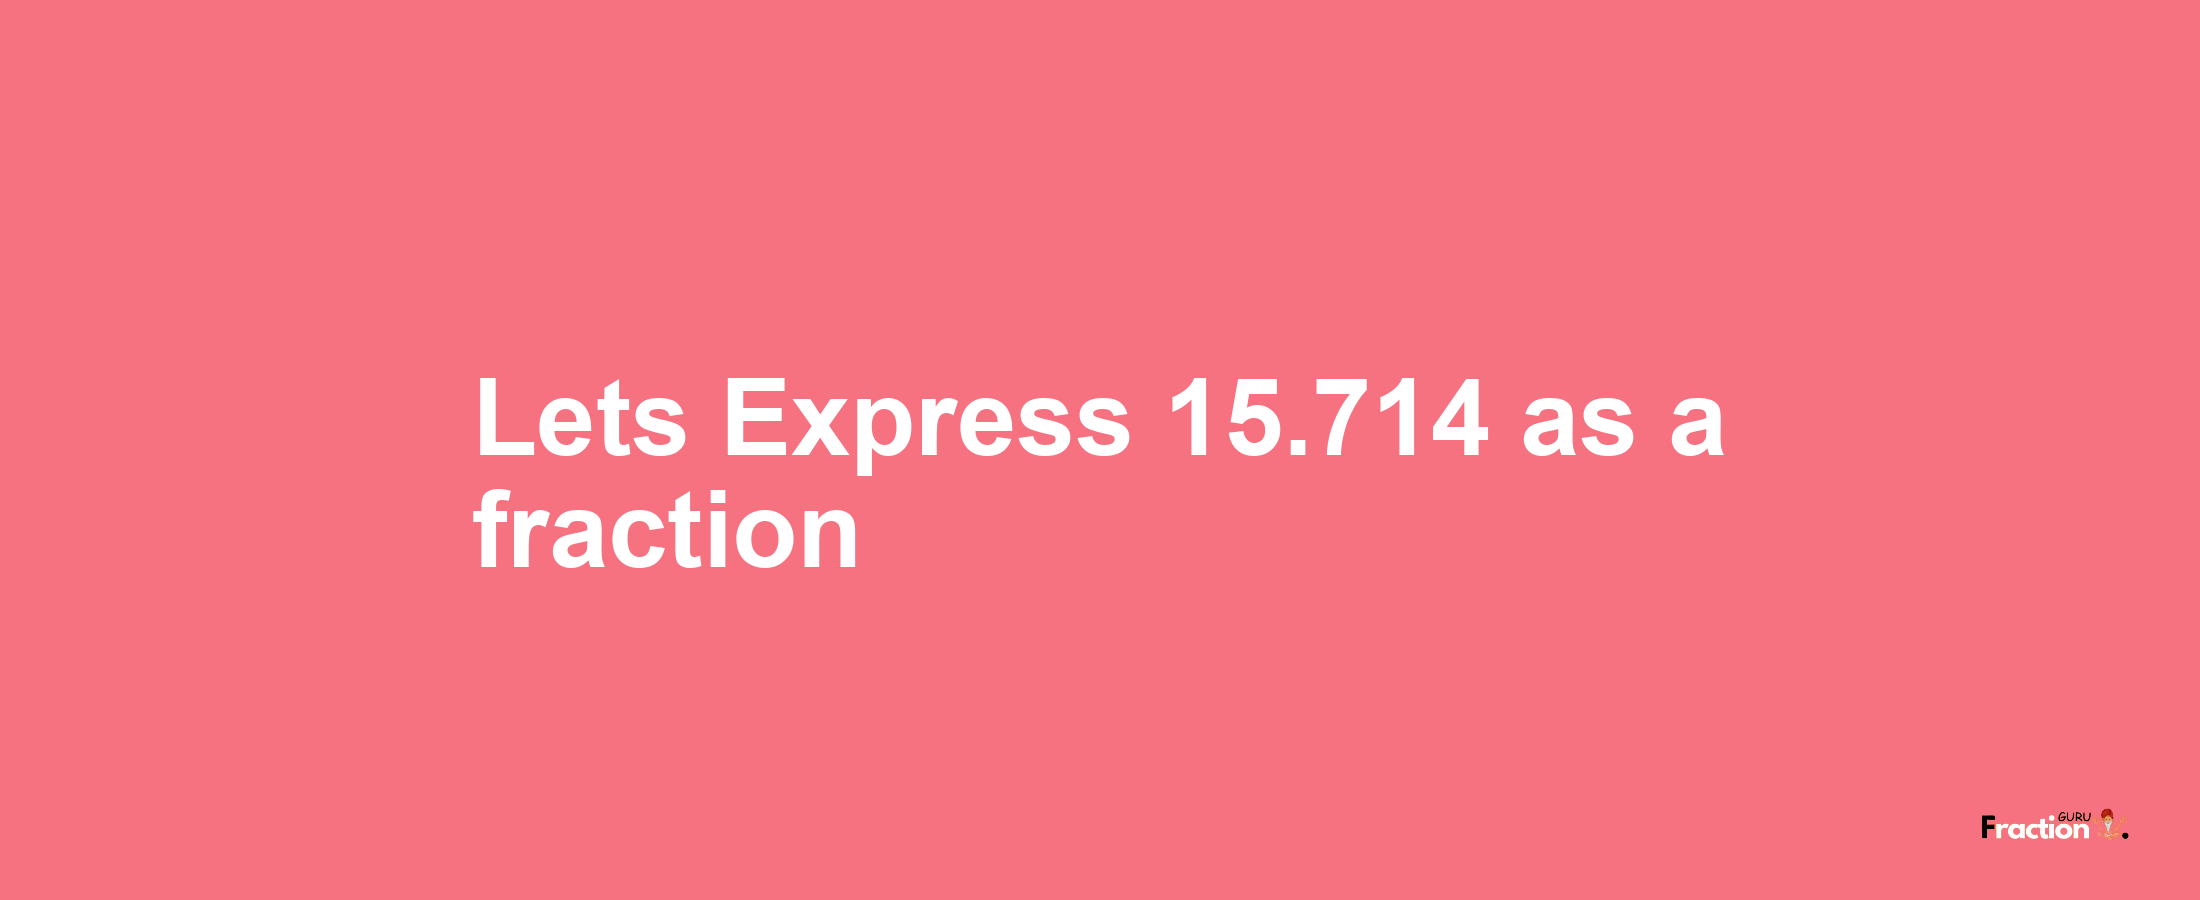 Lets Express 15.714 as afraction